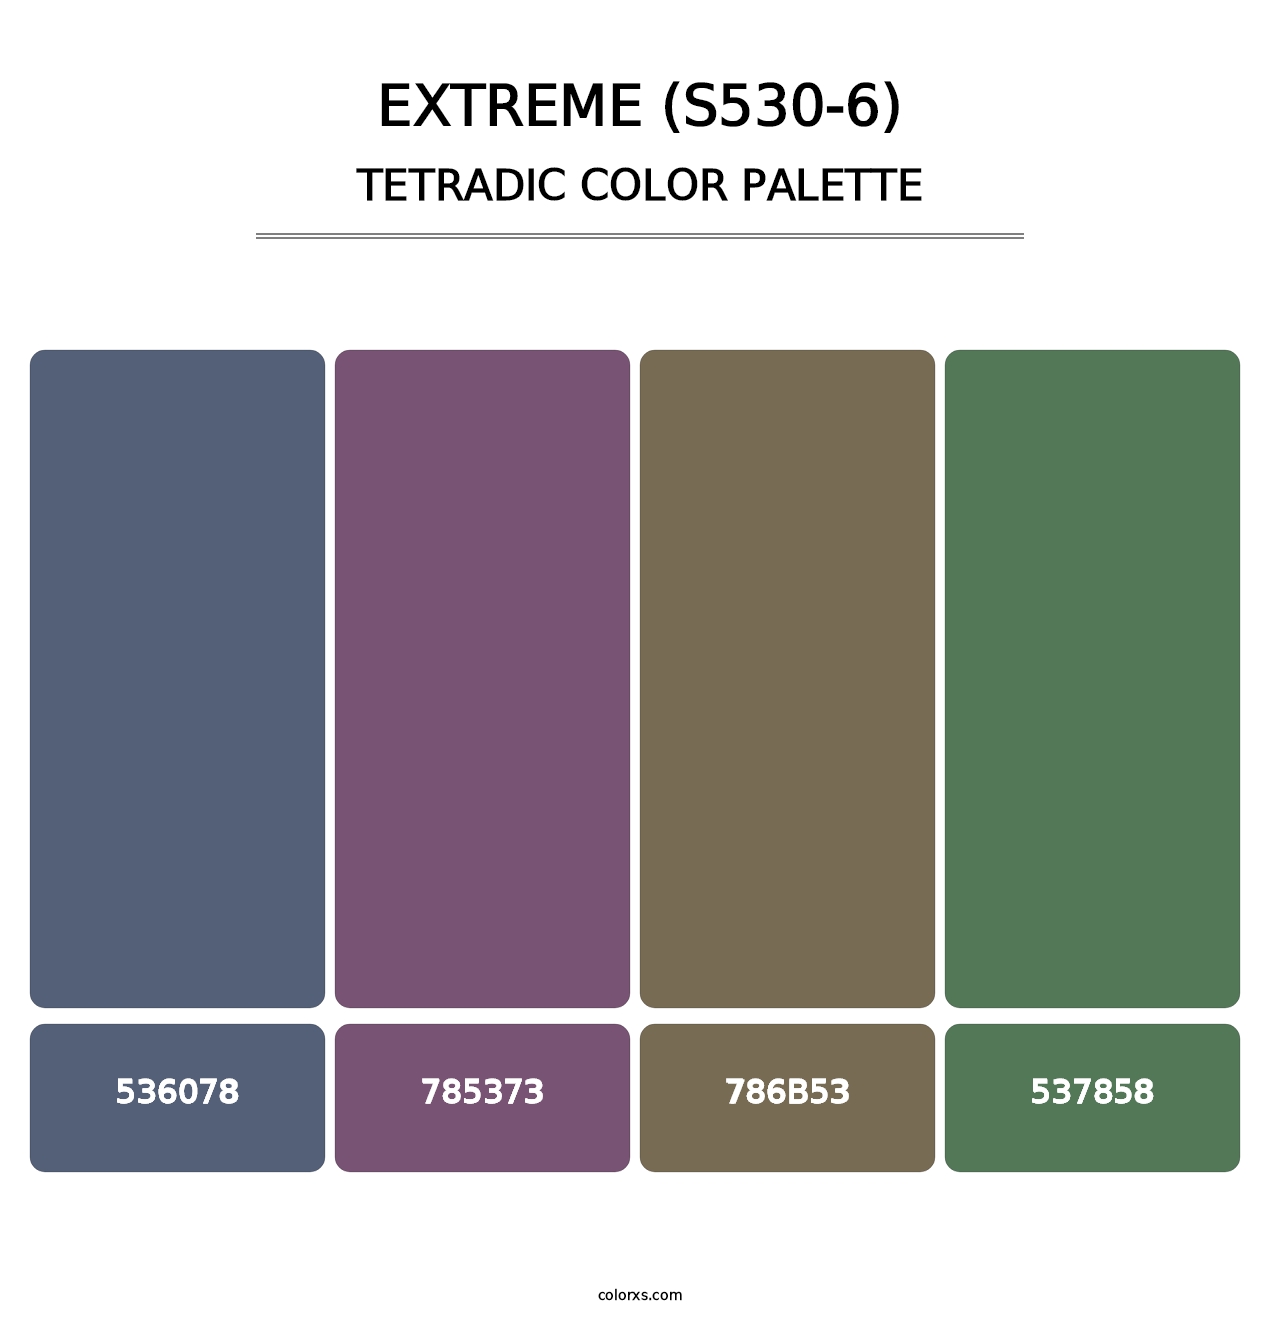 Extreme (S530-6) - Tetradic Color Palette